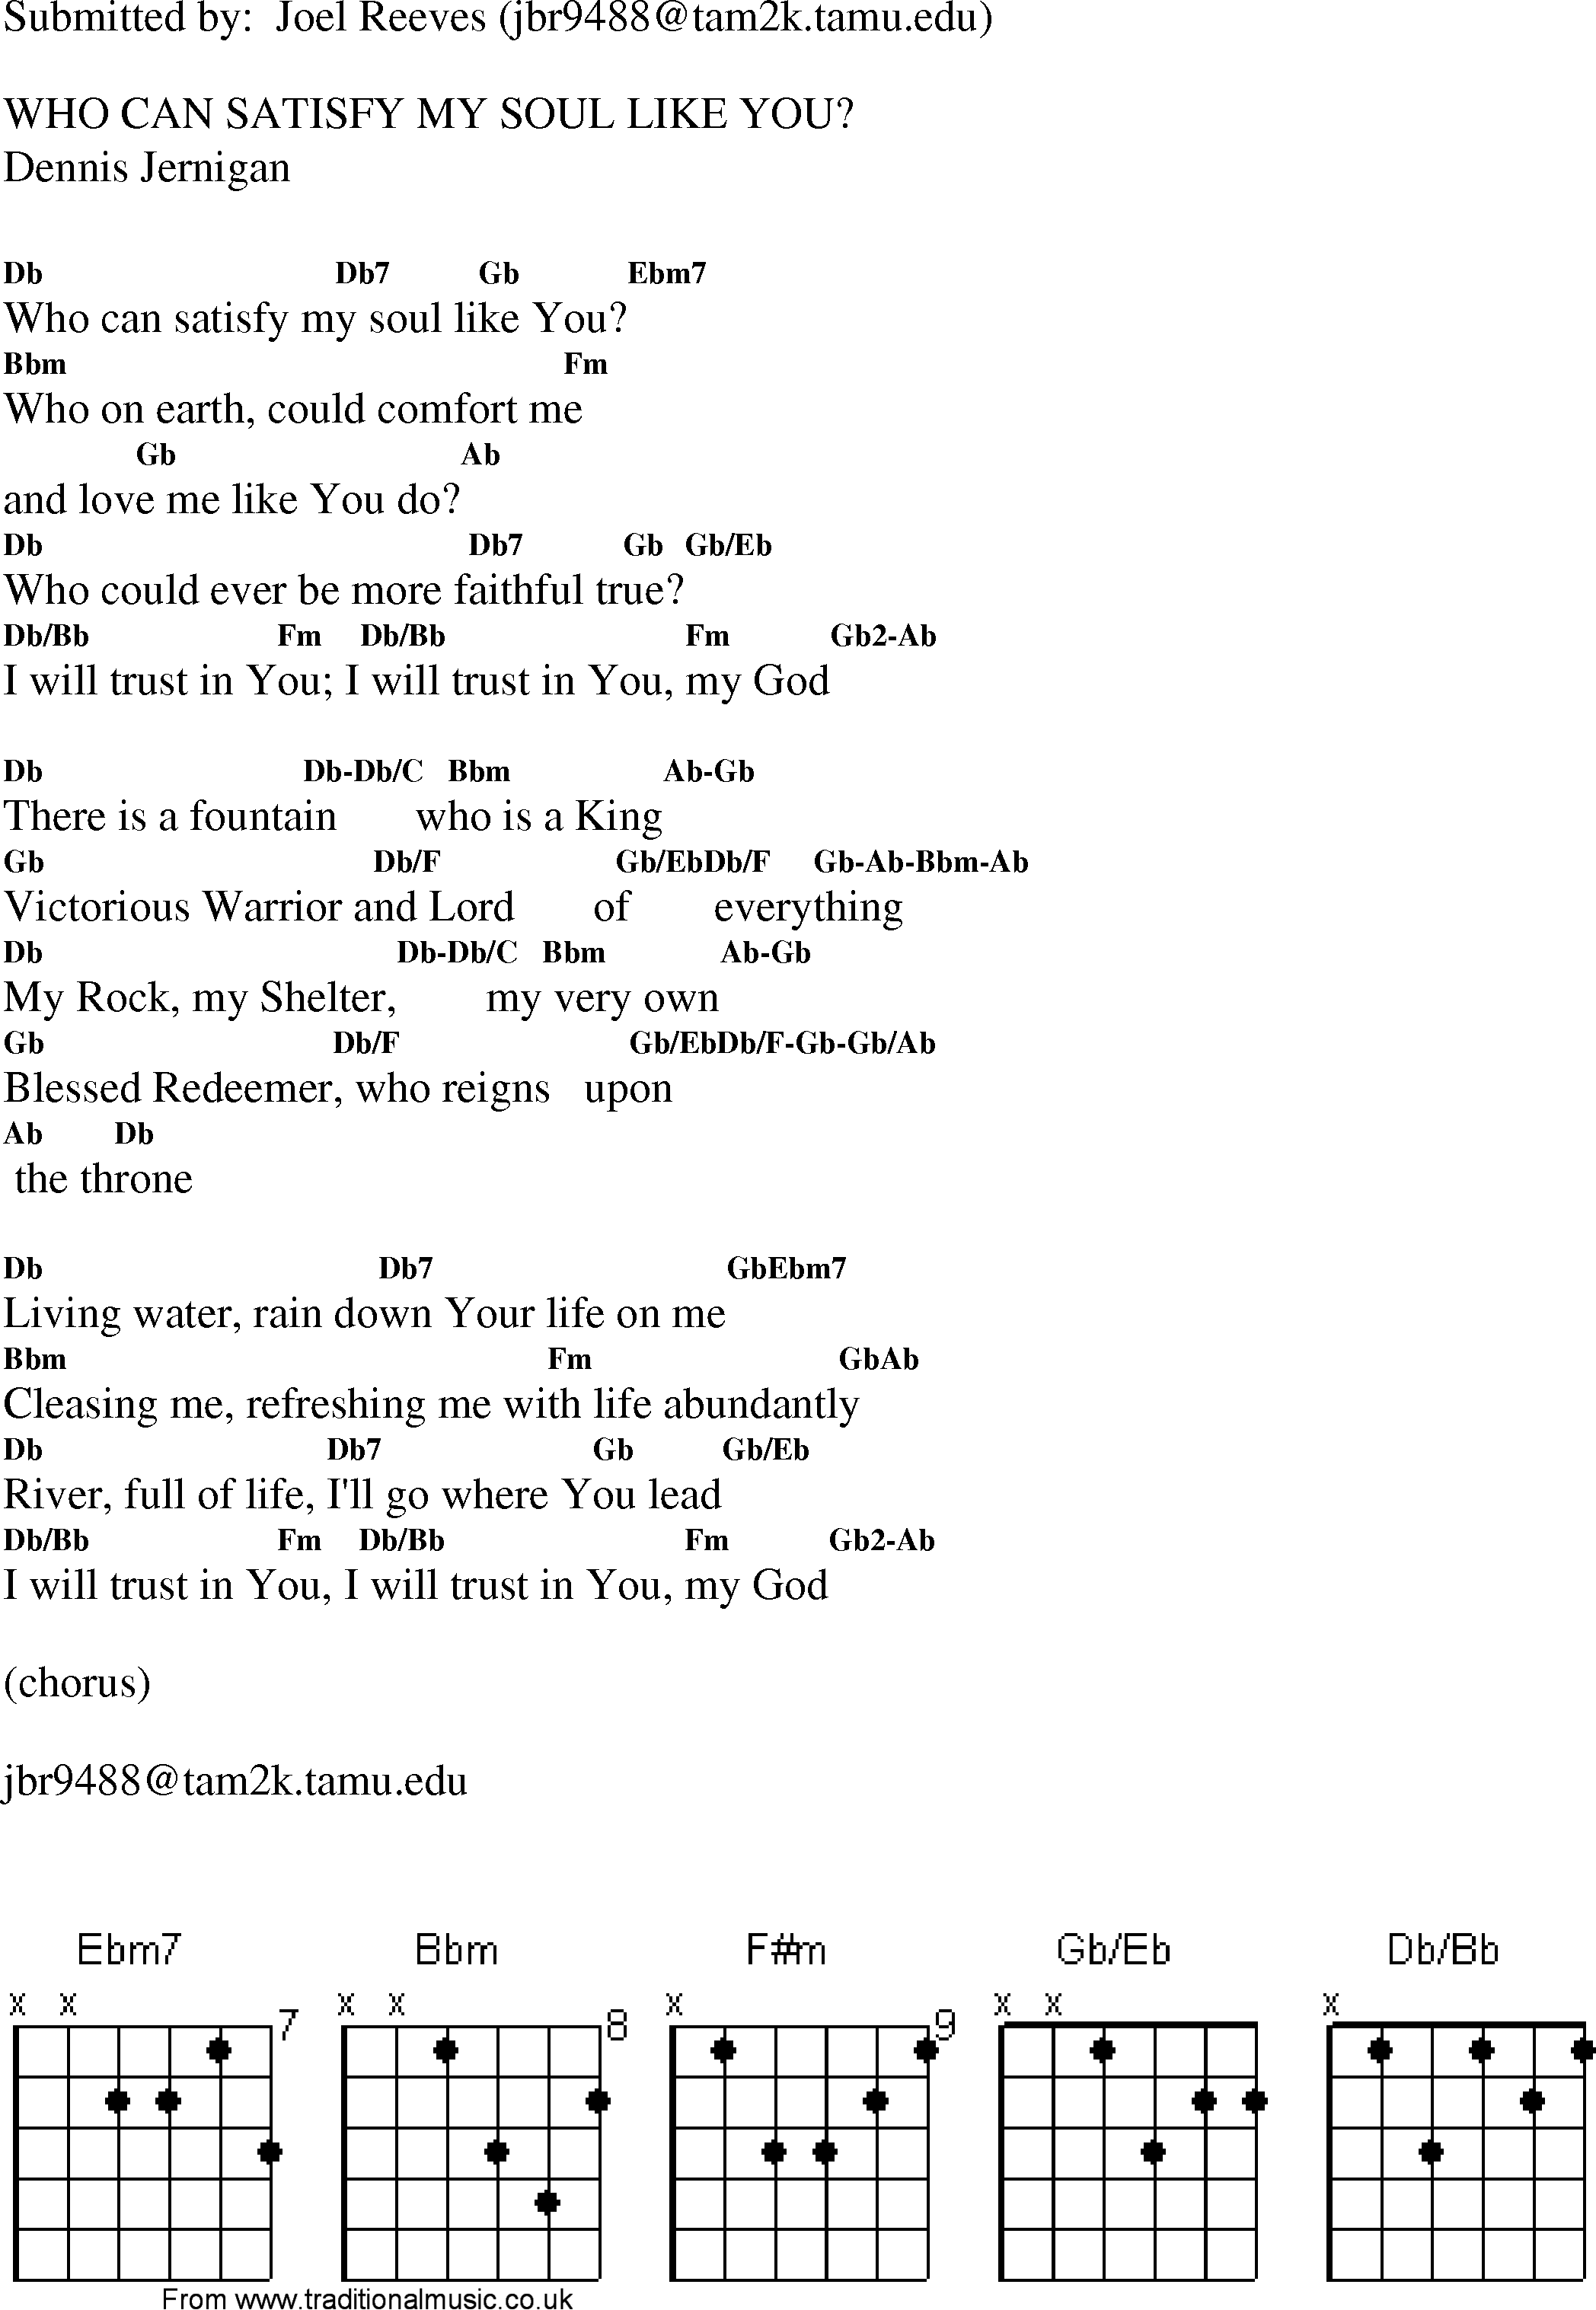 Gospel Song: who_can_satisfy_my_soul_like_you, lyrics and chords.